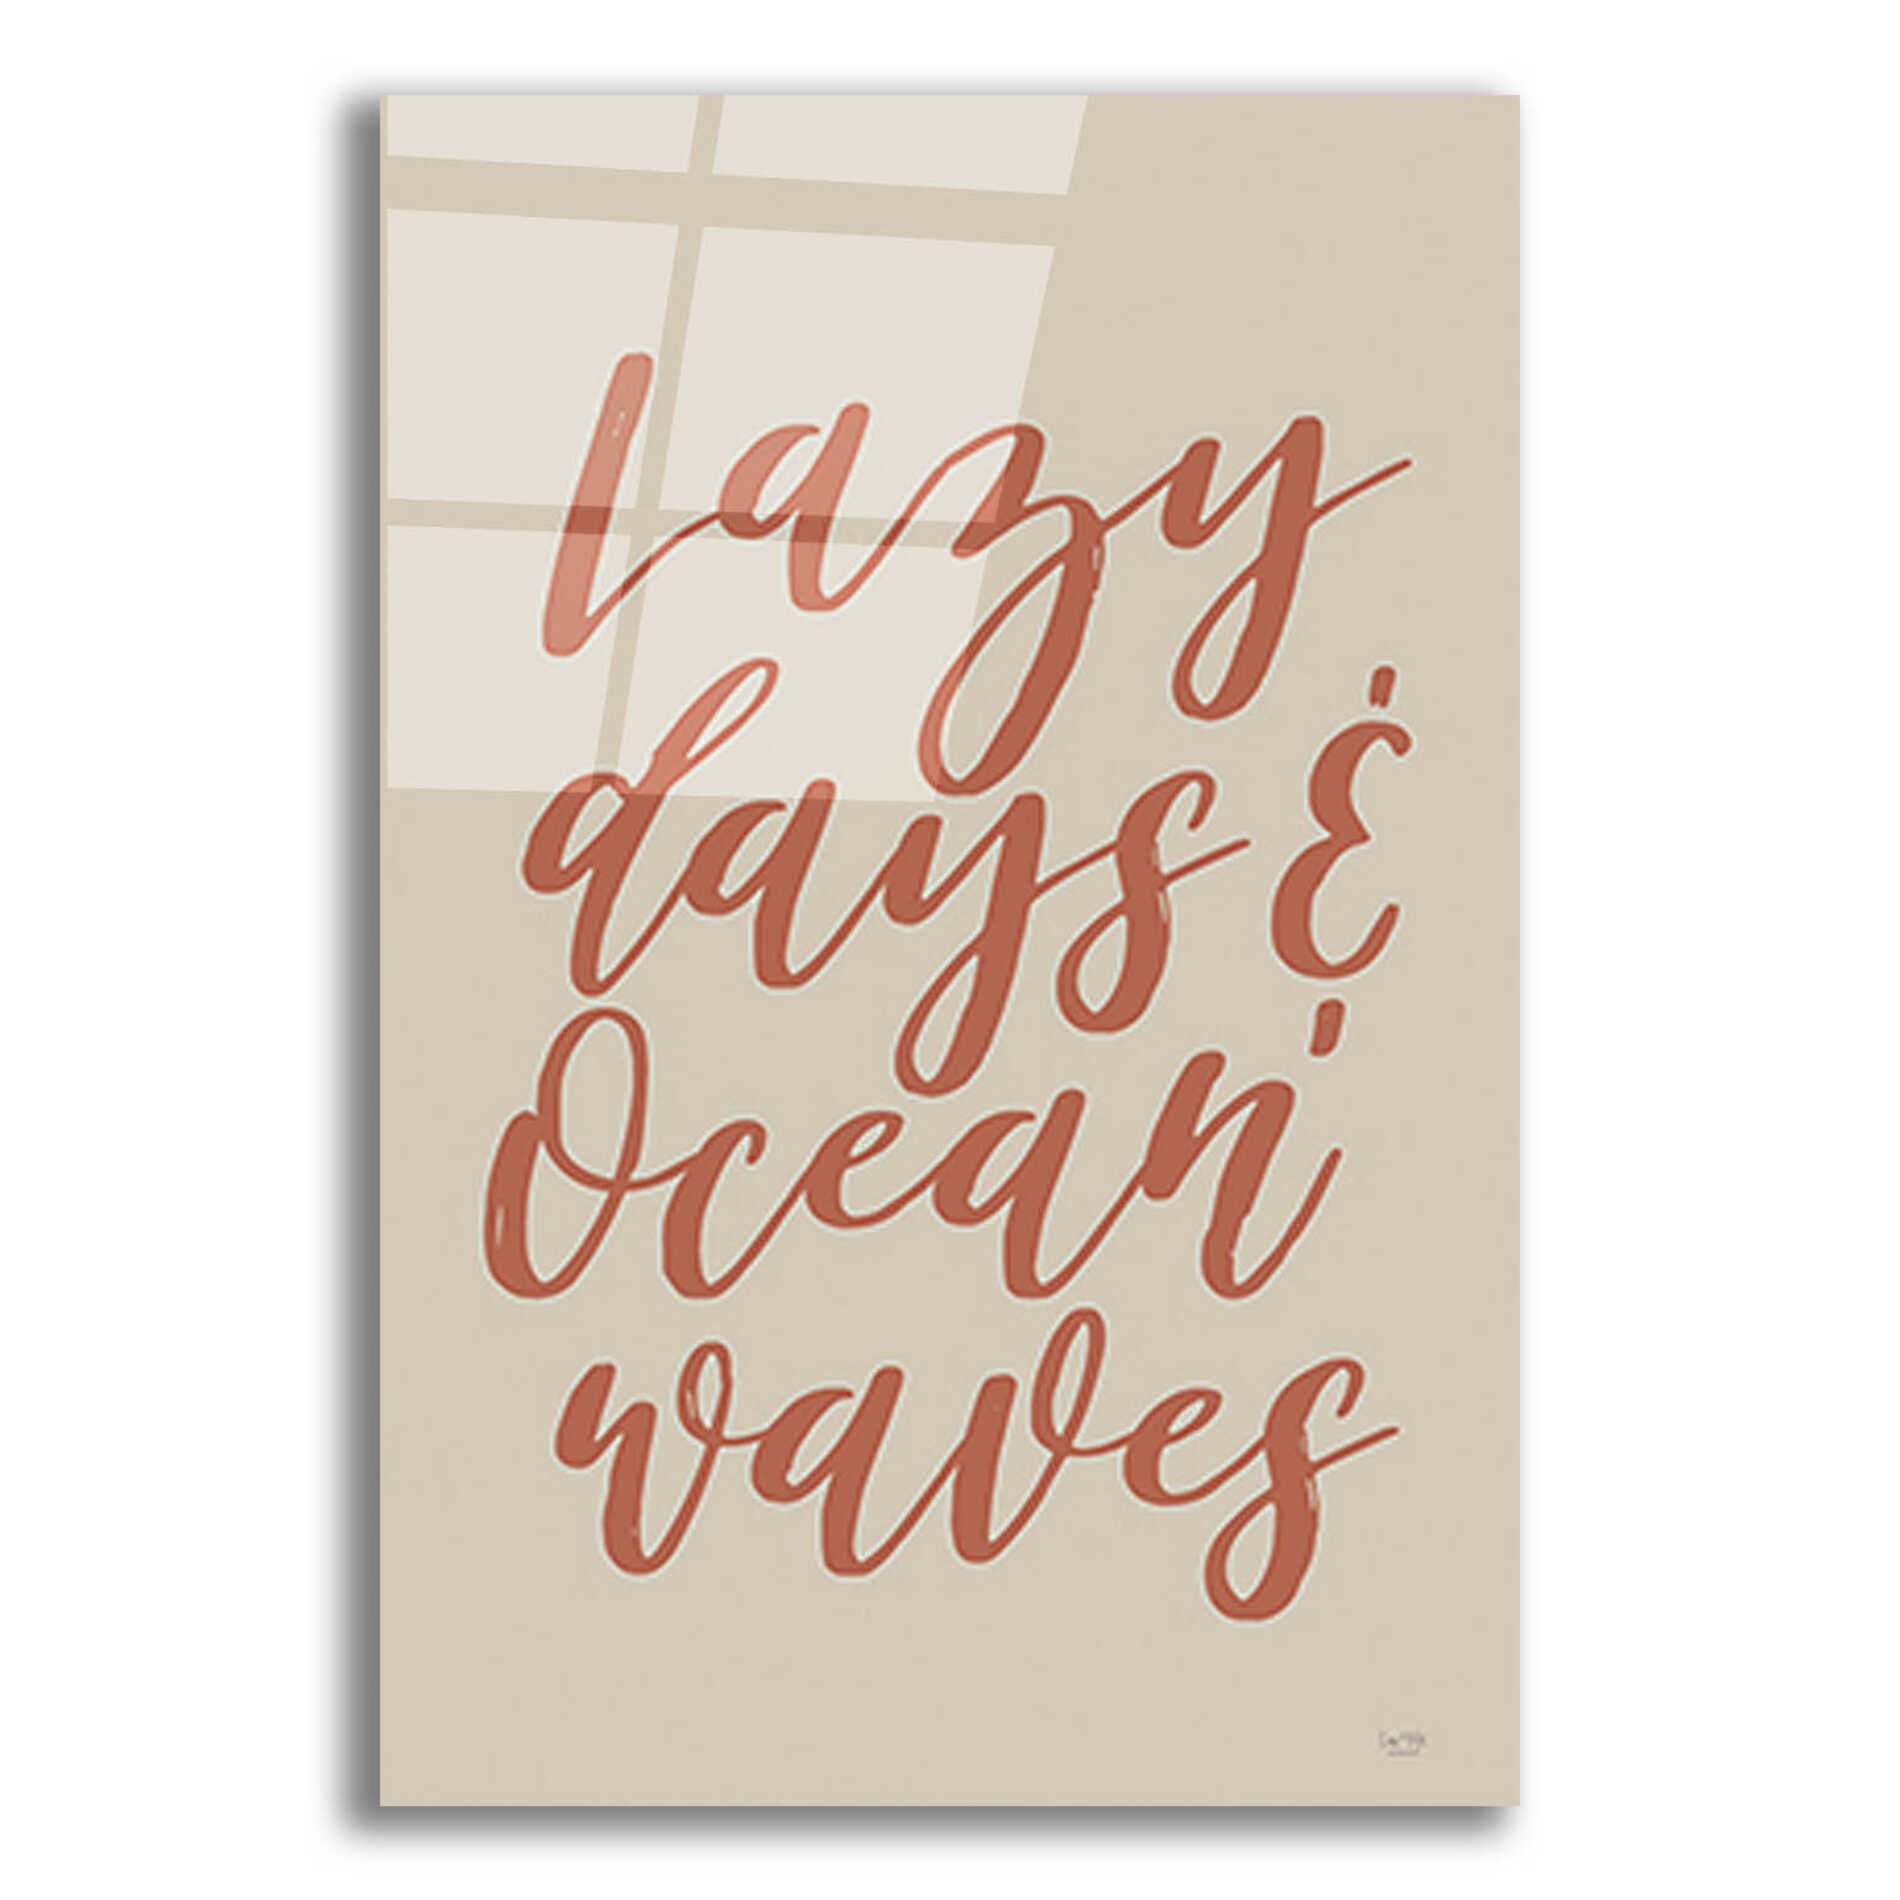 Epic Art 'Lazy Days & Ocean Waves' by Lux + Me Designs, Acrylic Glass Wall Art,12x16